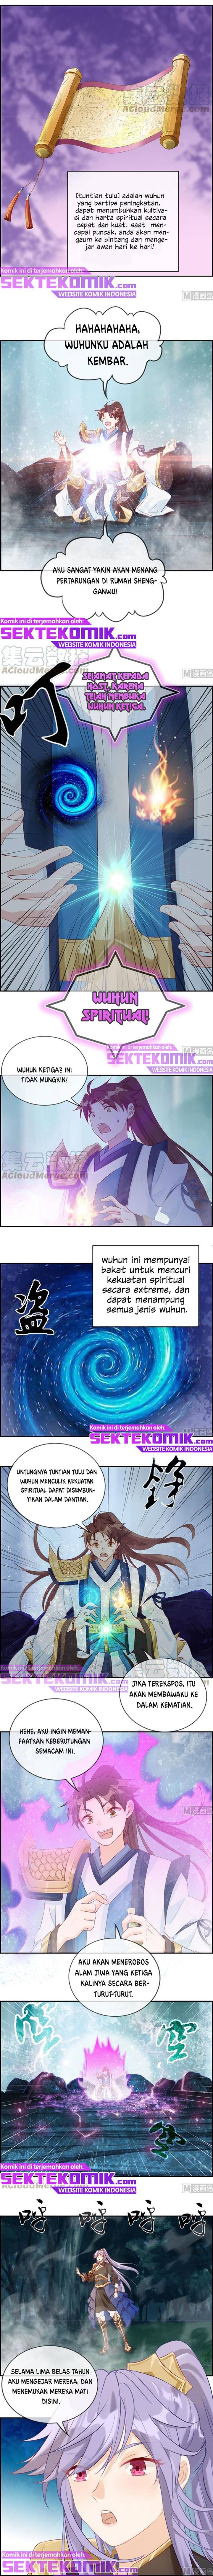 Strongest System Chapter 18